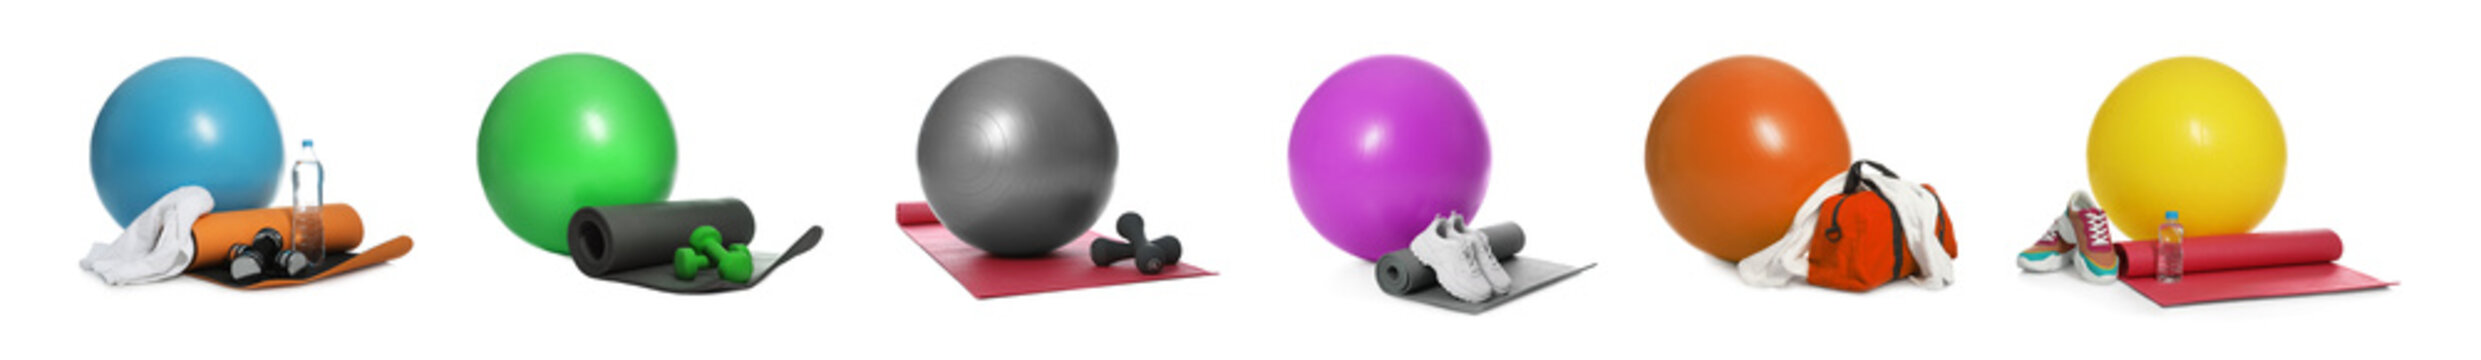 Set of fitness balls and other sport accessories on white background. Banner design